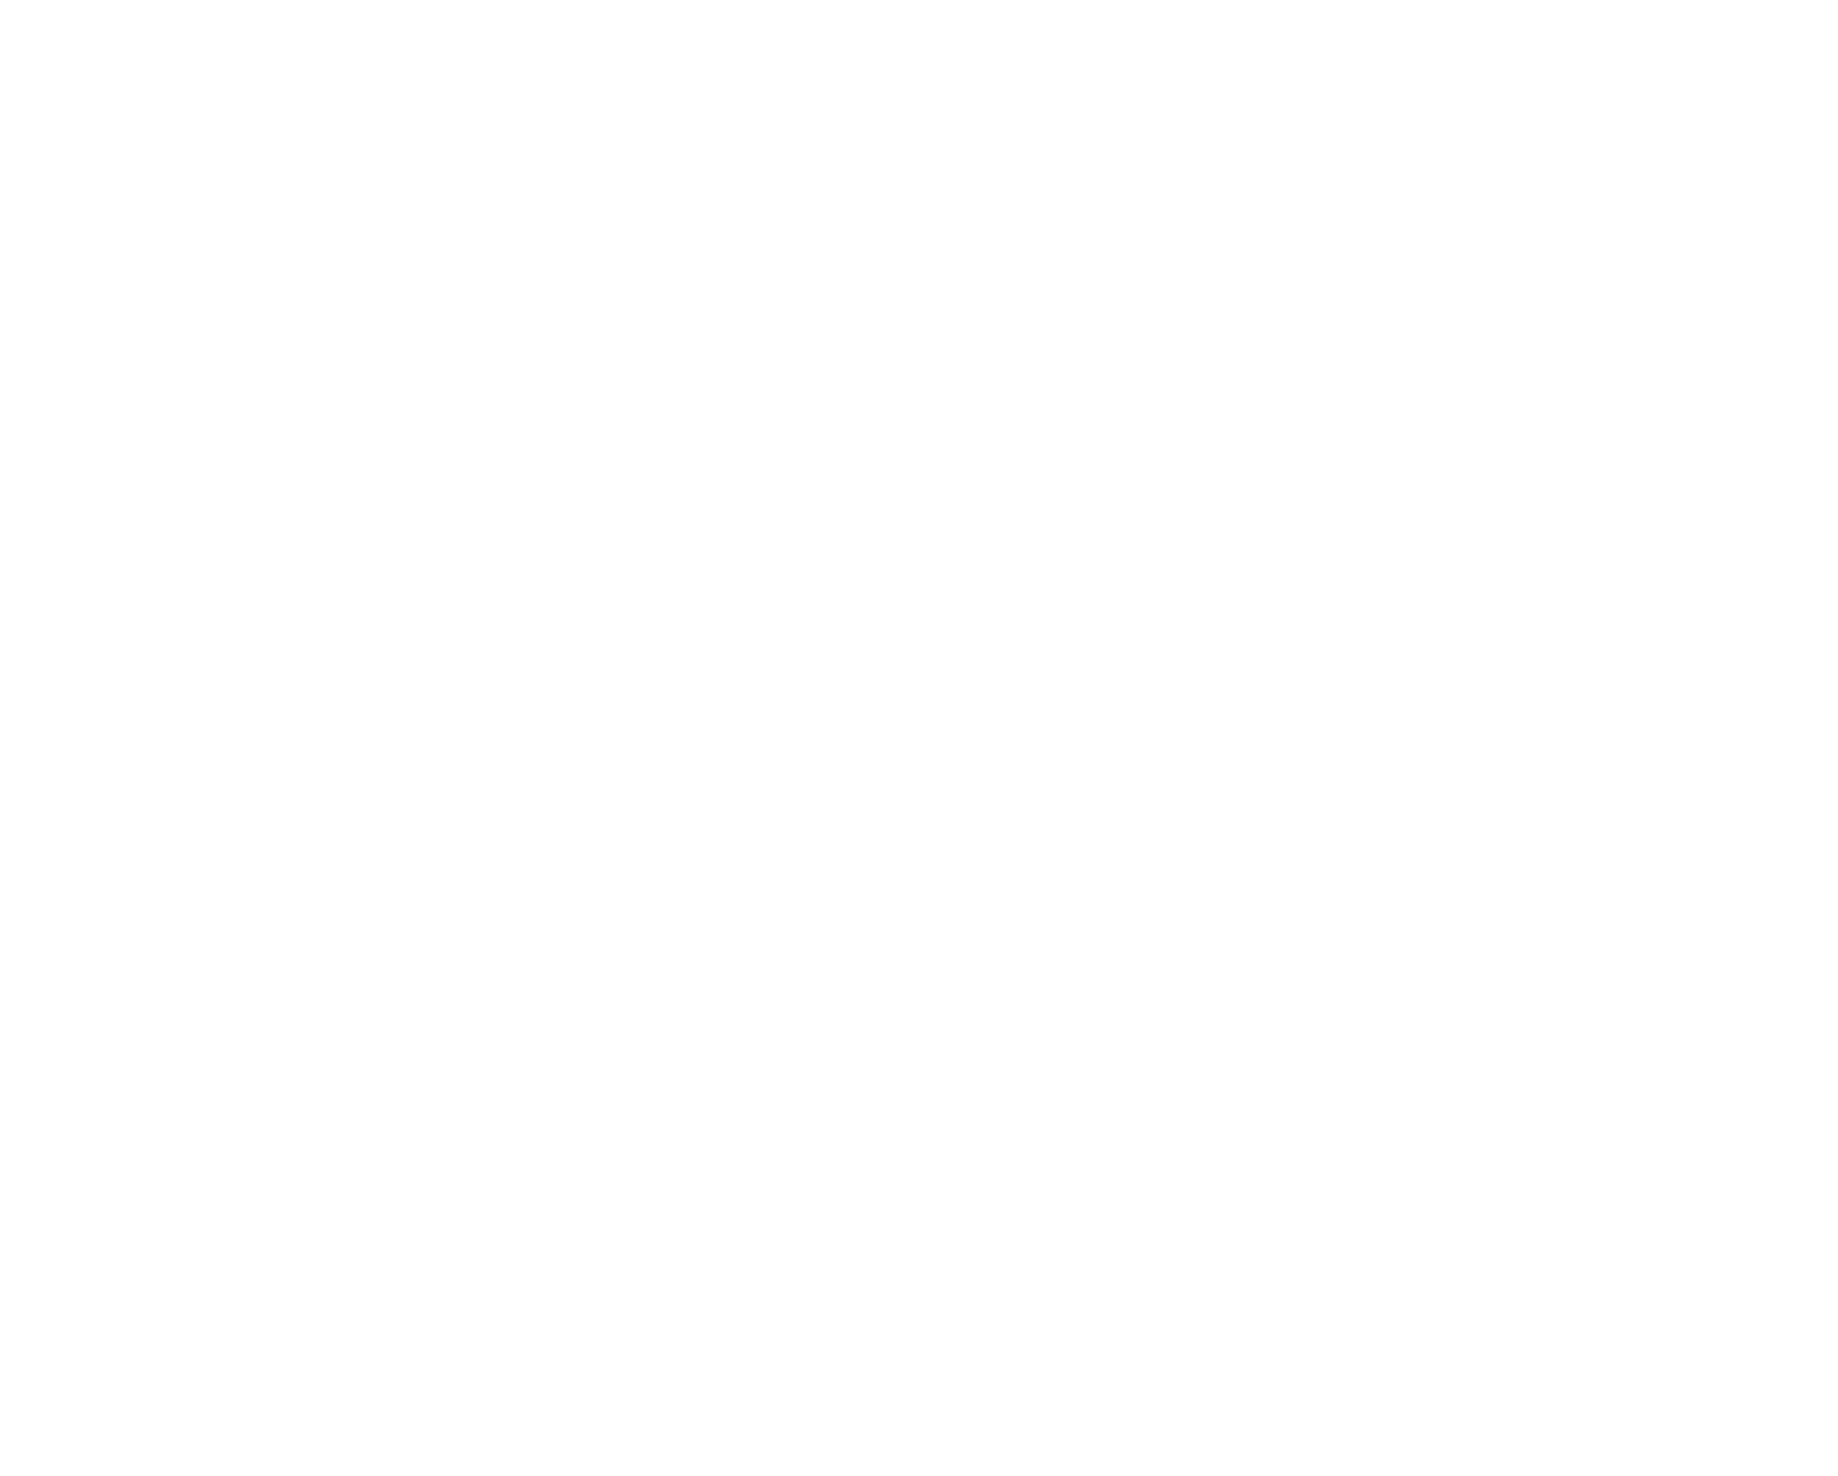 Cheleq Investments